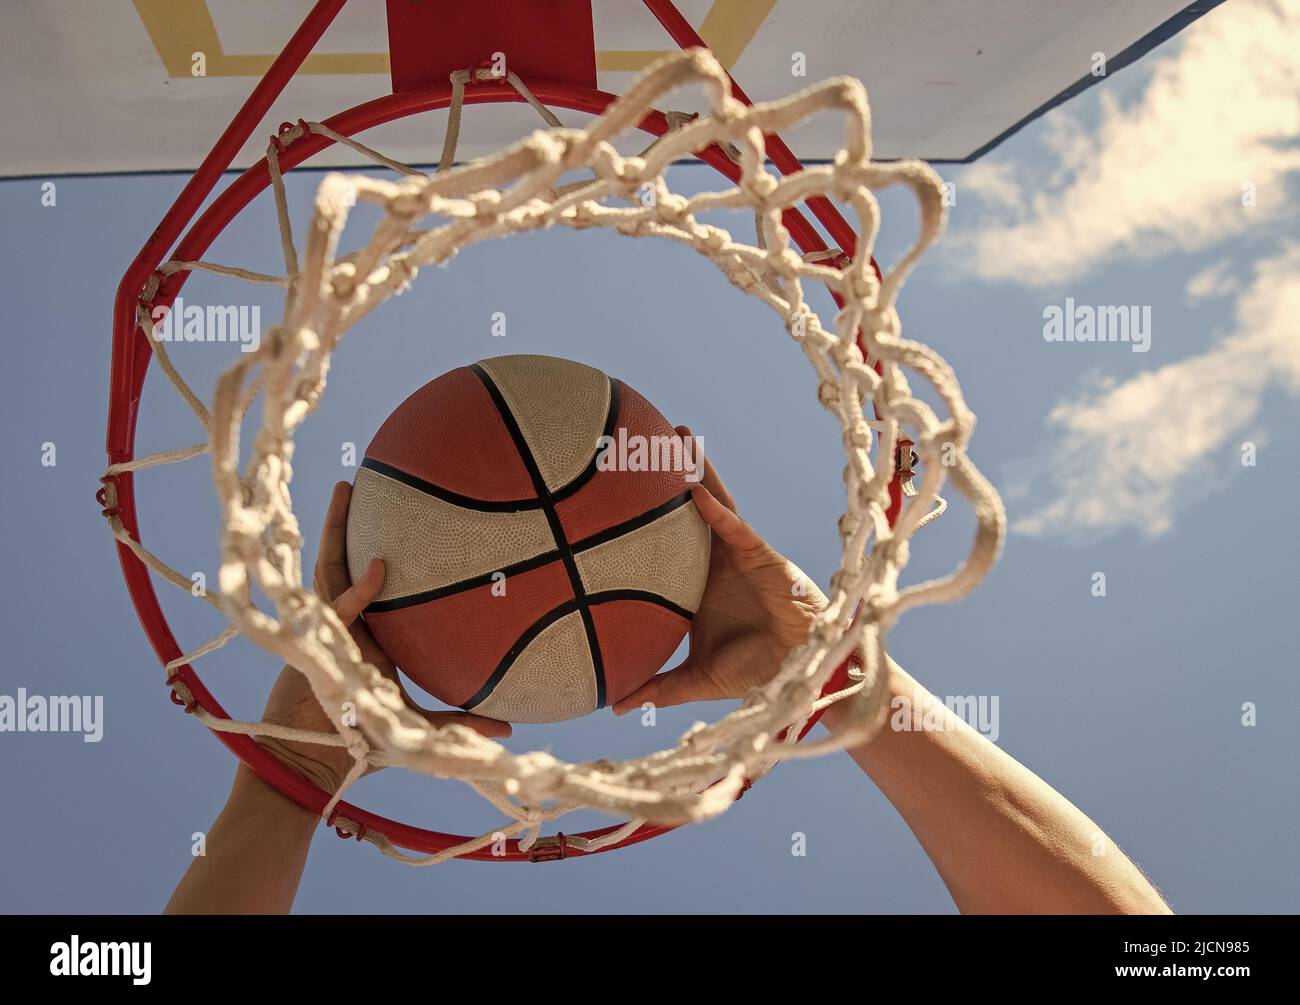 hands of basketball player throws the ball into the hoop, success Stock Photo